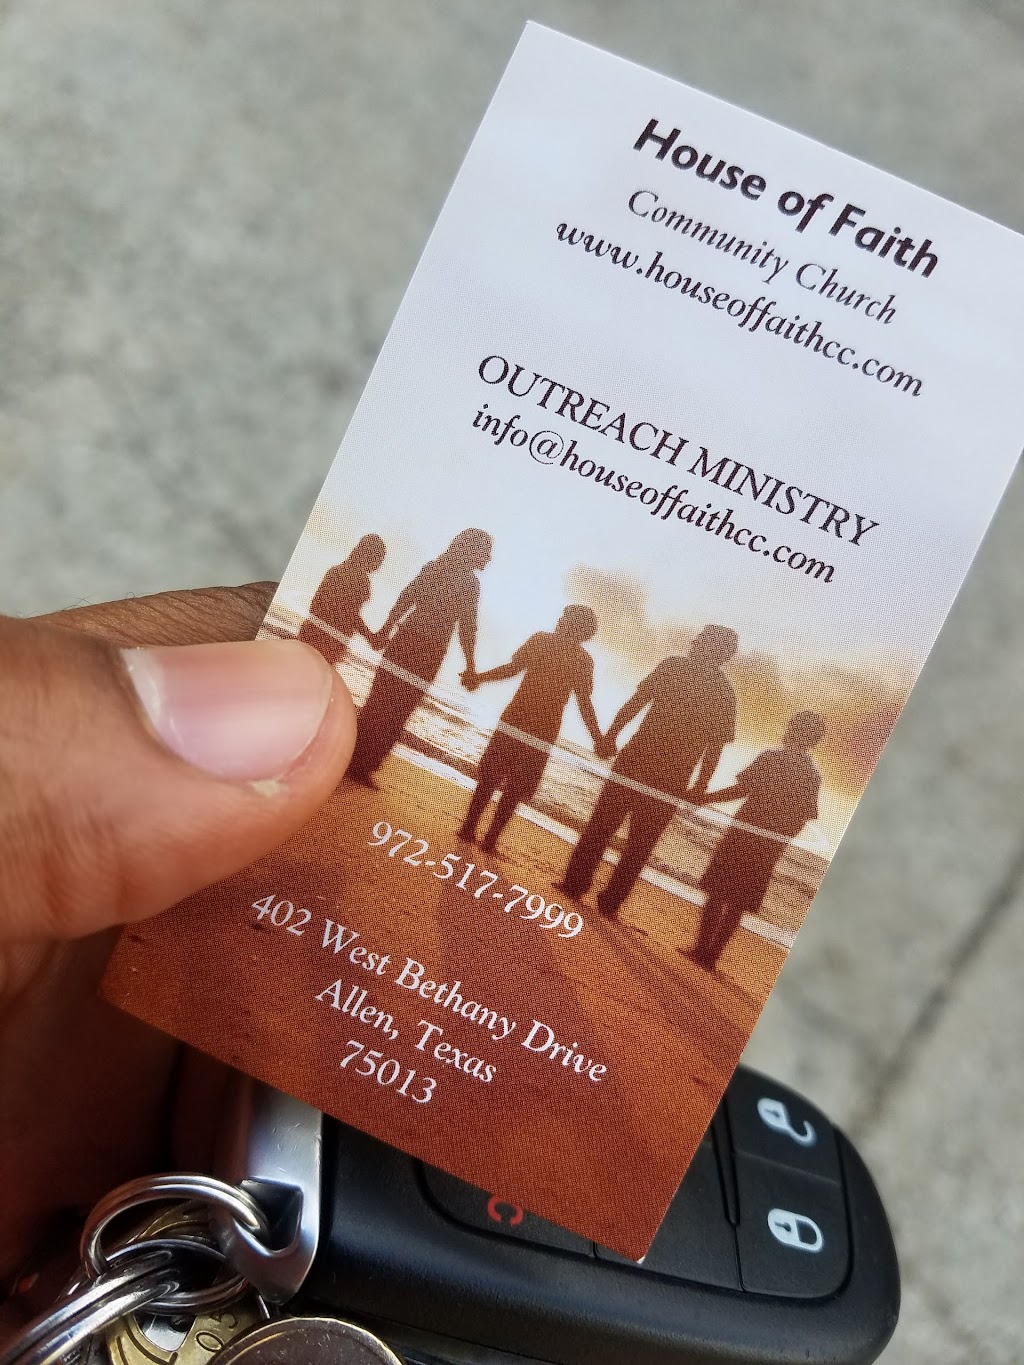 House of Faith Community Church | We have transitioned. Facebook Sunday service @ 10:30am. Updates coming soon, 402 W Bethany Dr, Allen, TX 75013, USA | Phone: (972) 517-7999